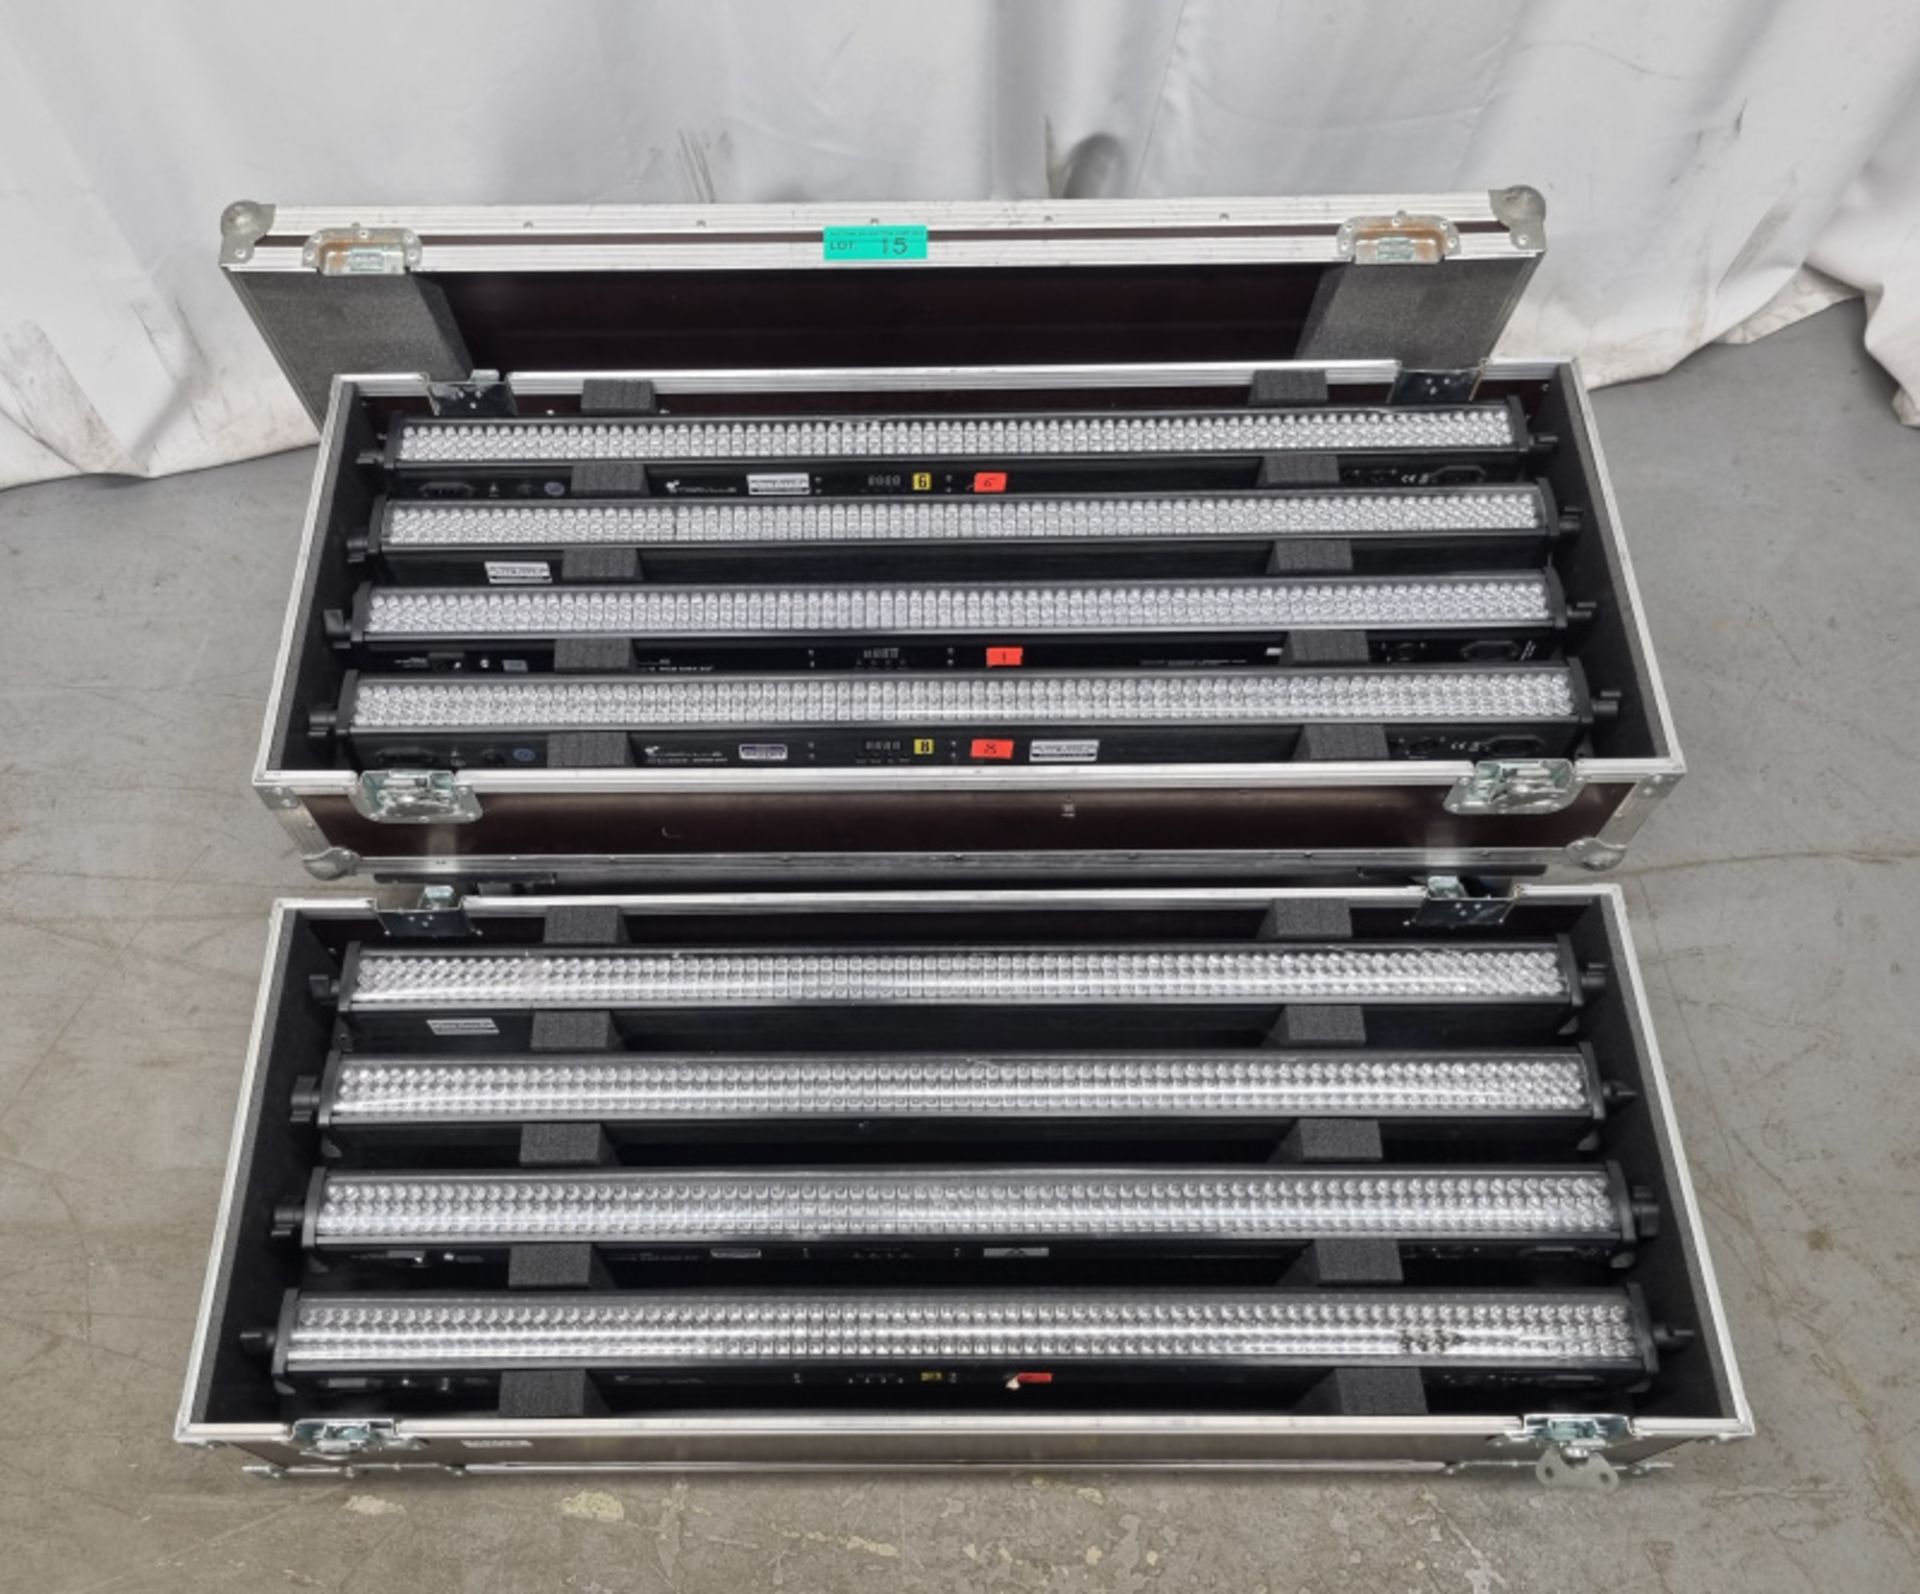 8 x Stairville LED bar 240/8 30RGB DMX, 4 have cracks with flight case